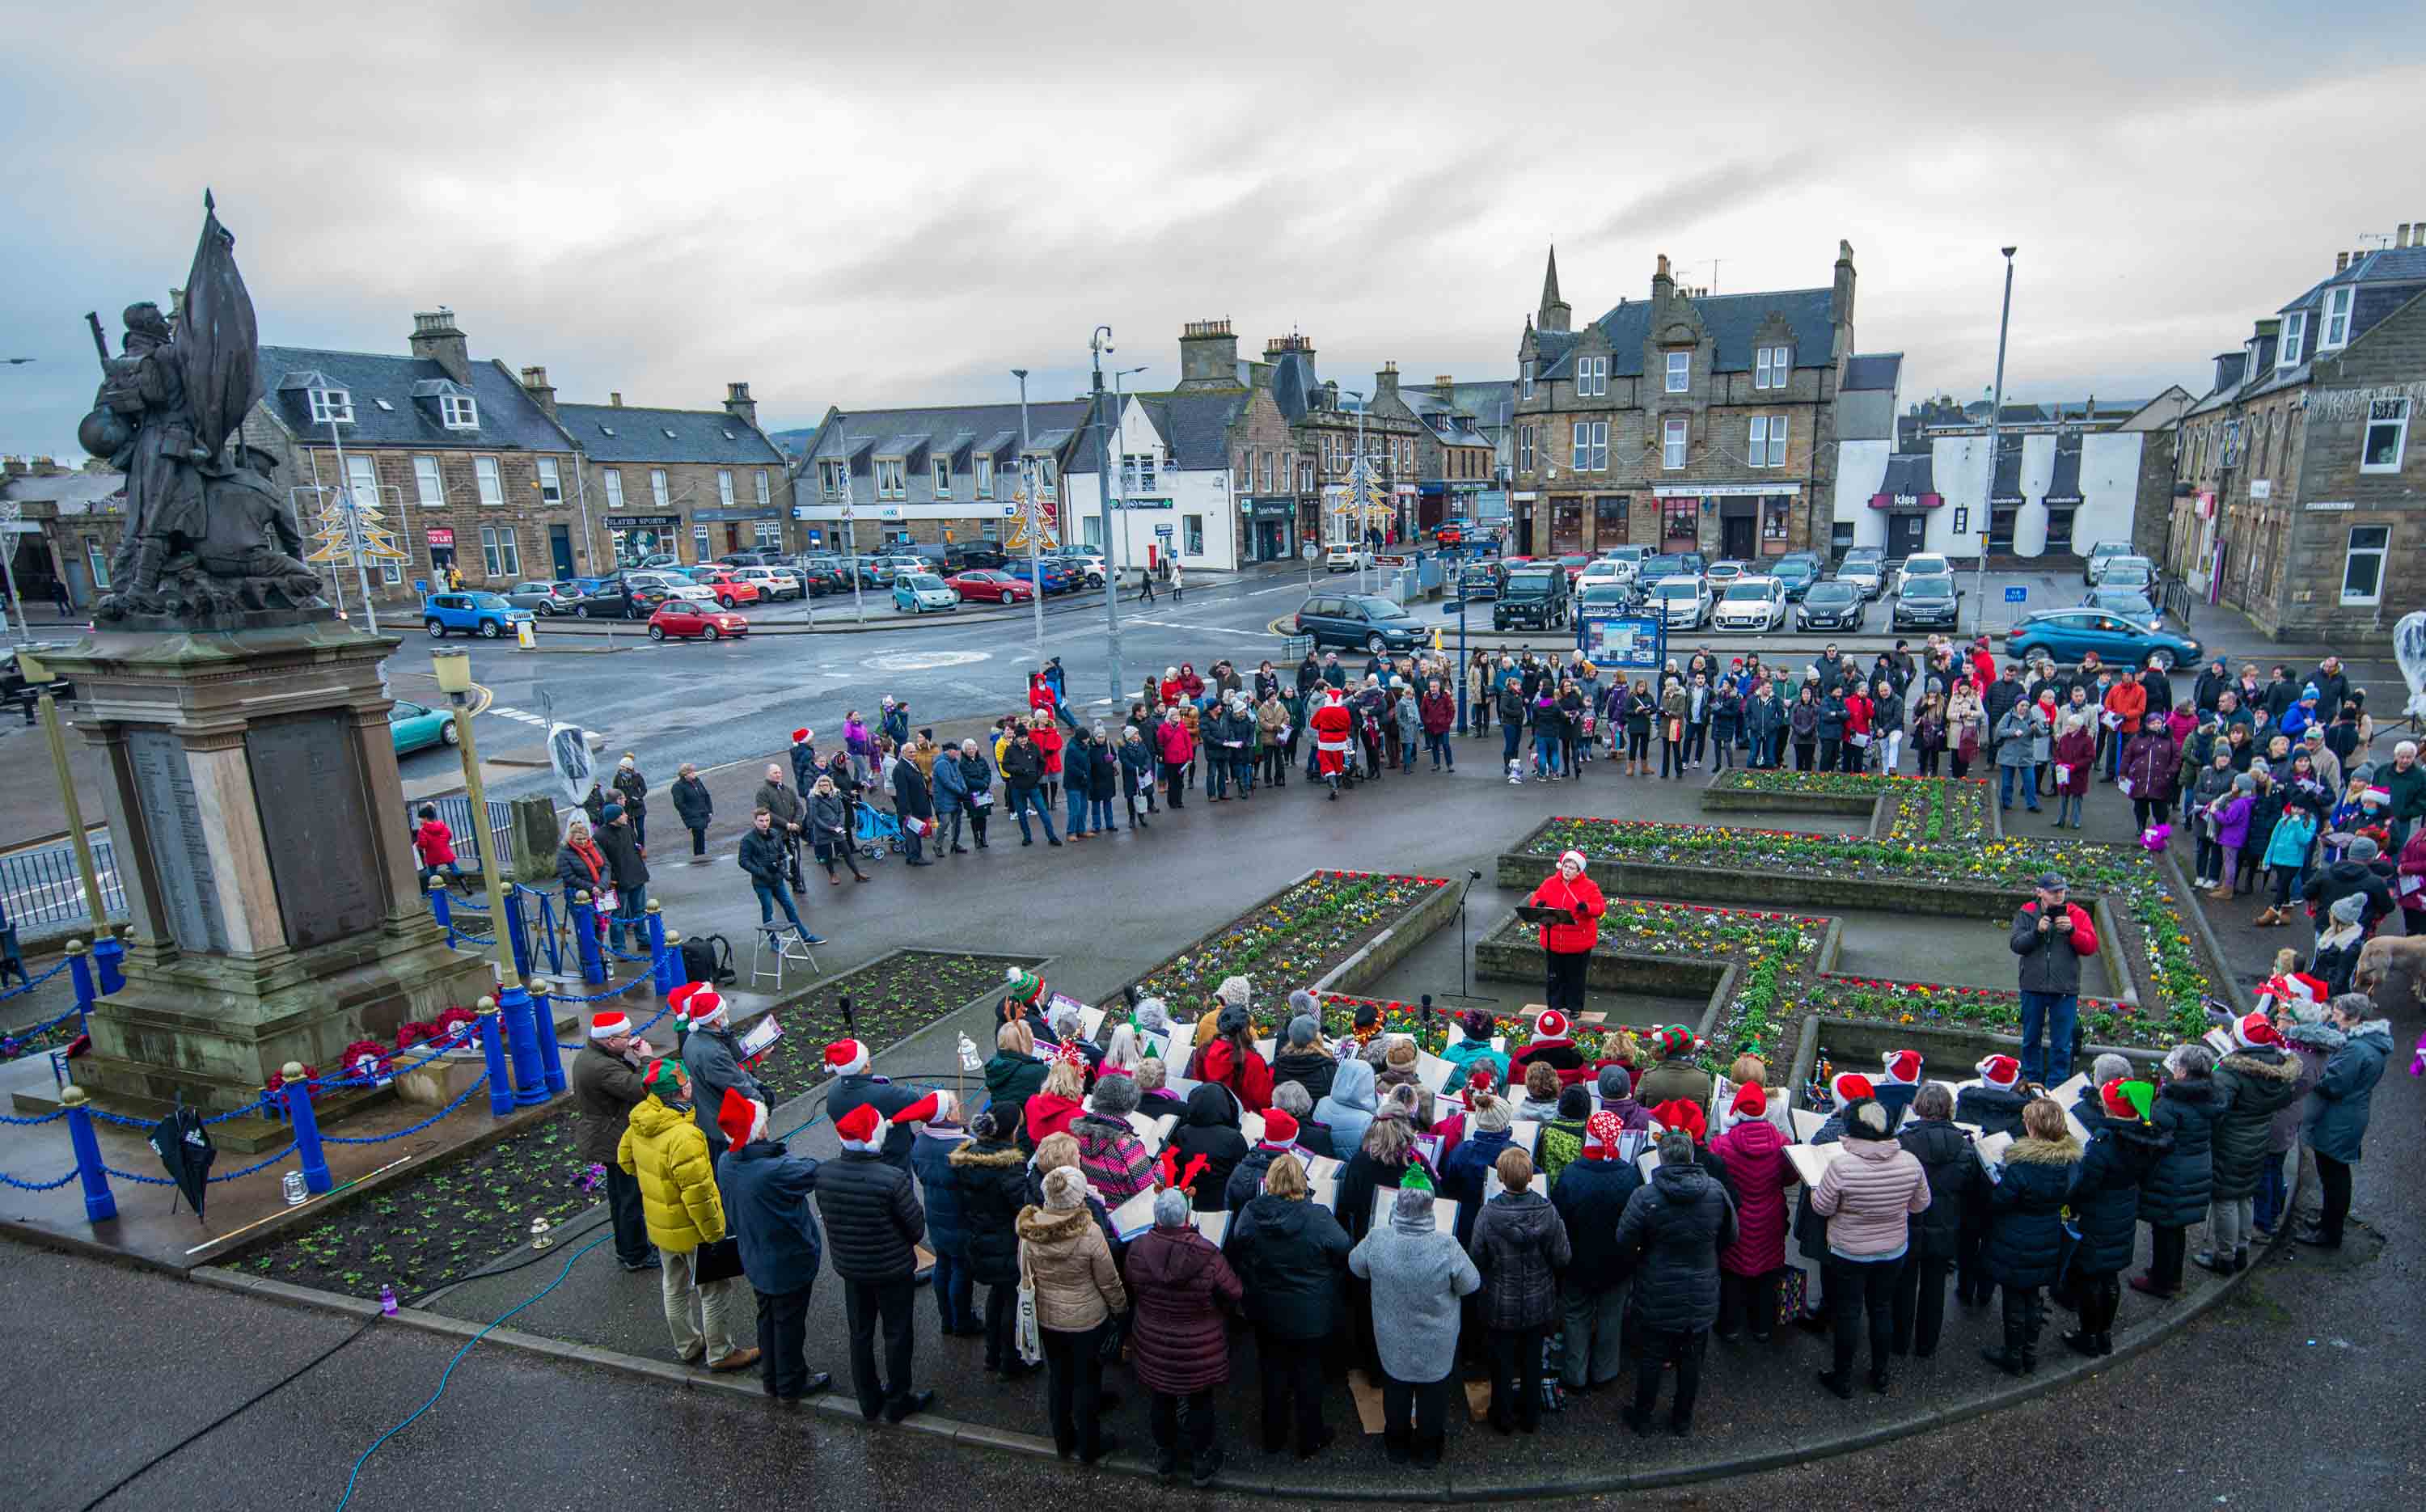 The event was the first of its kind organised by Buckie and District Community Choir.